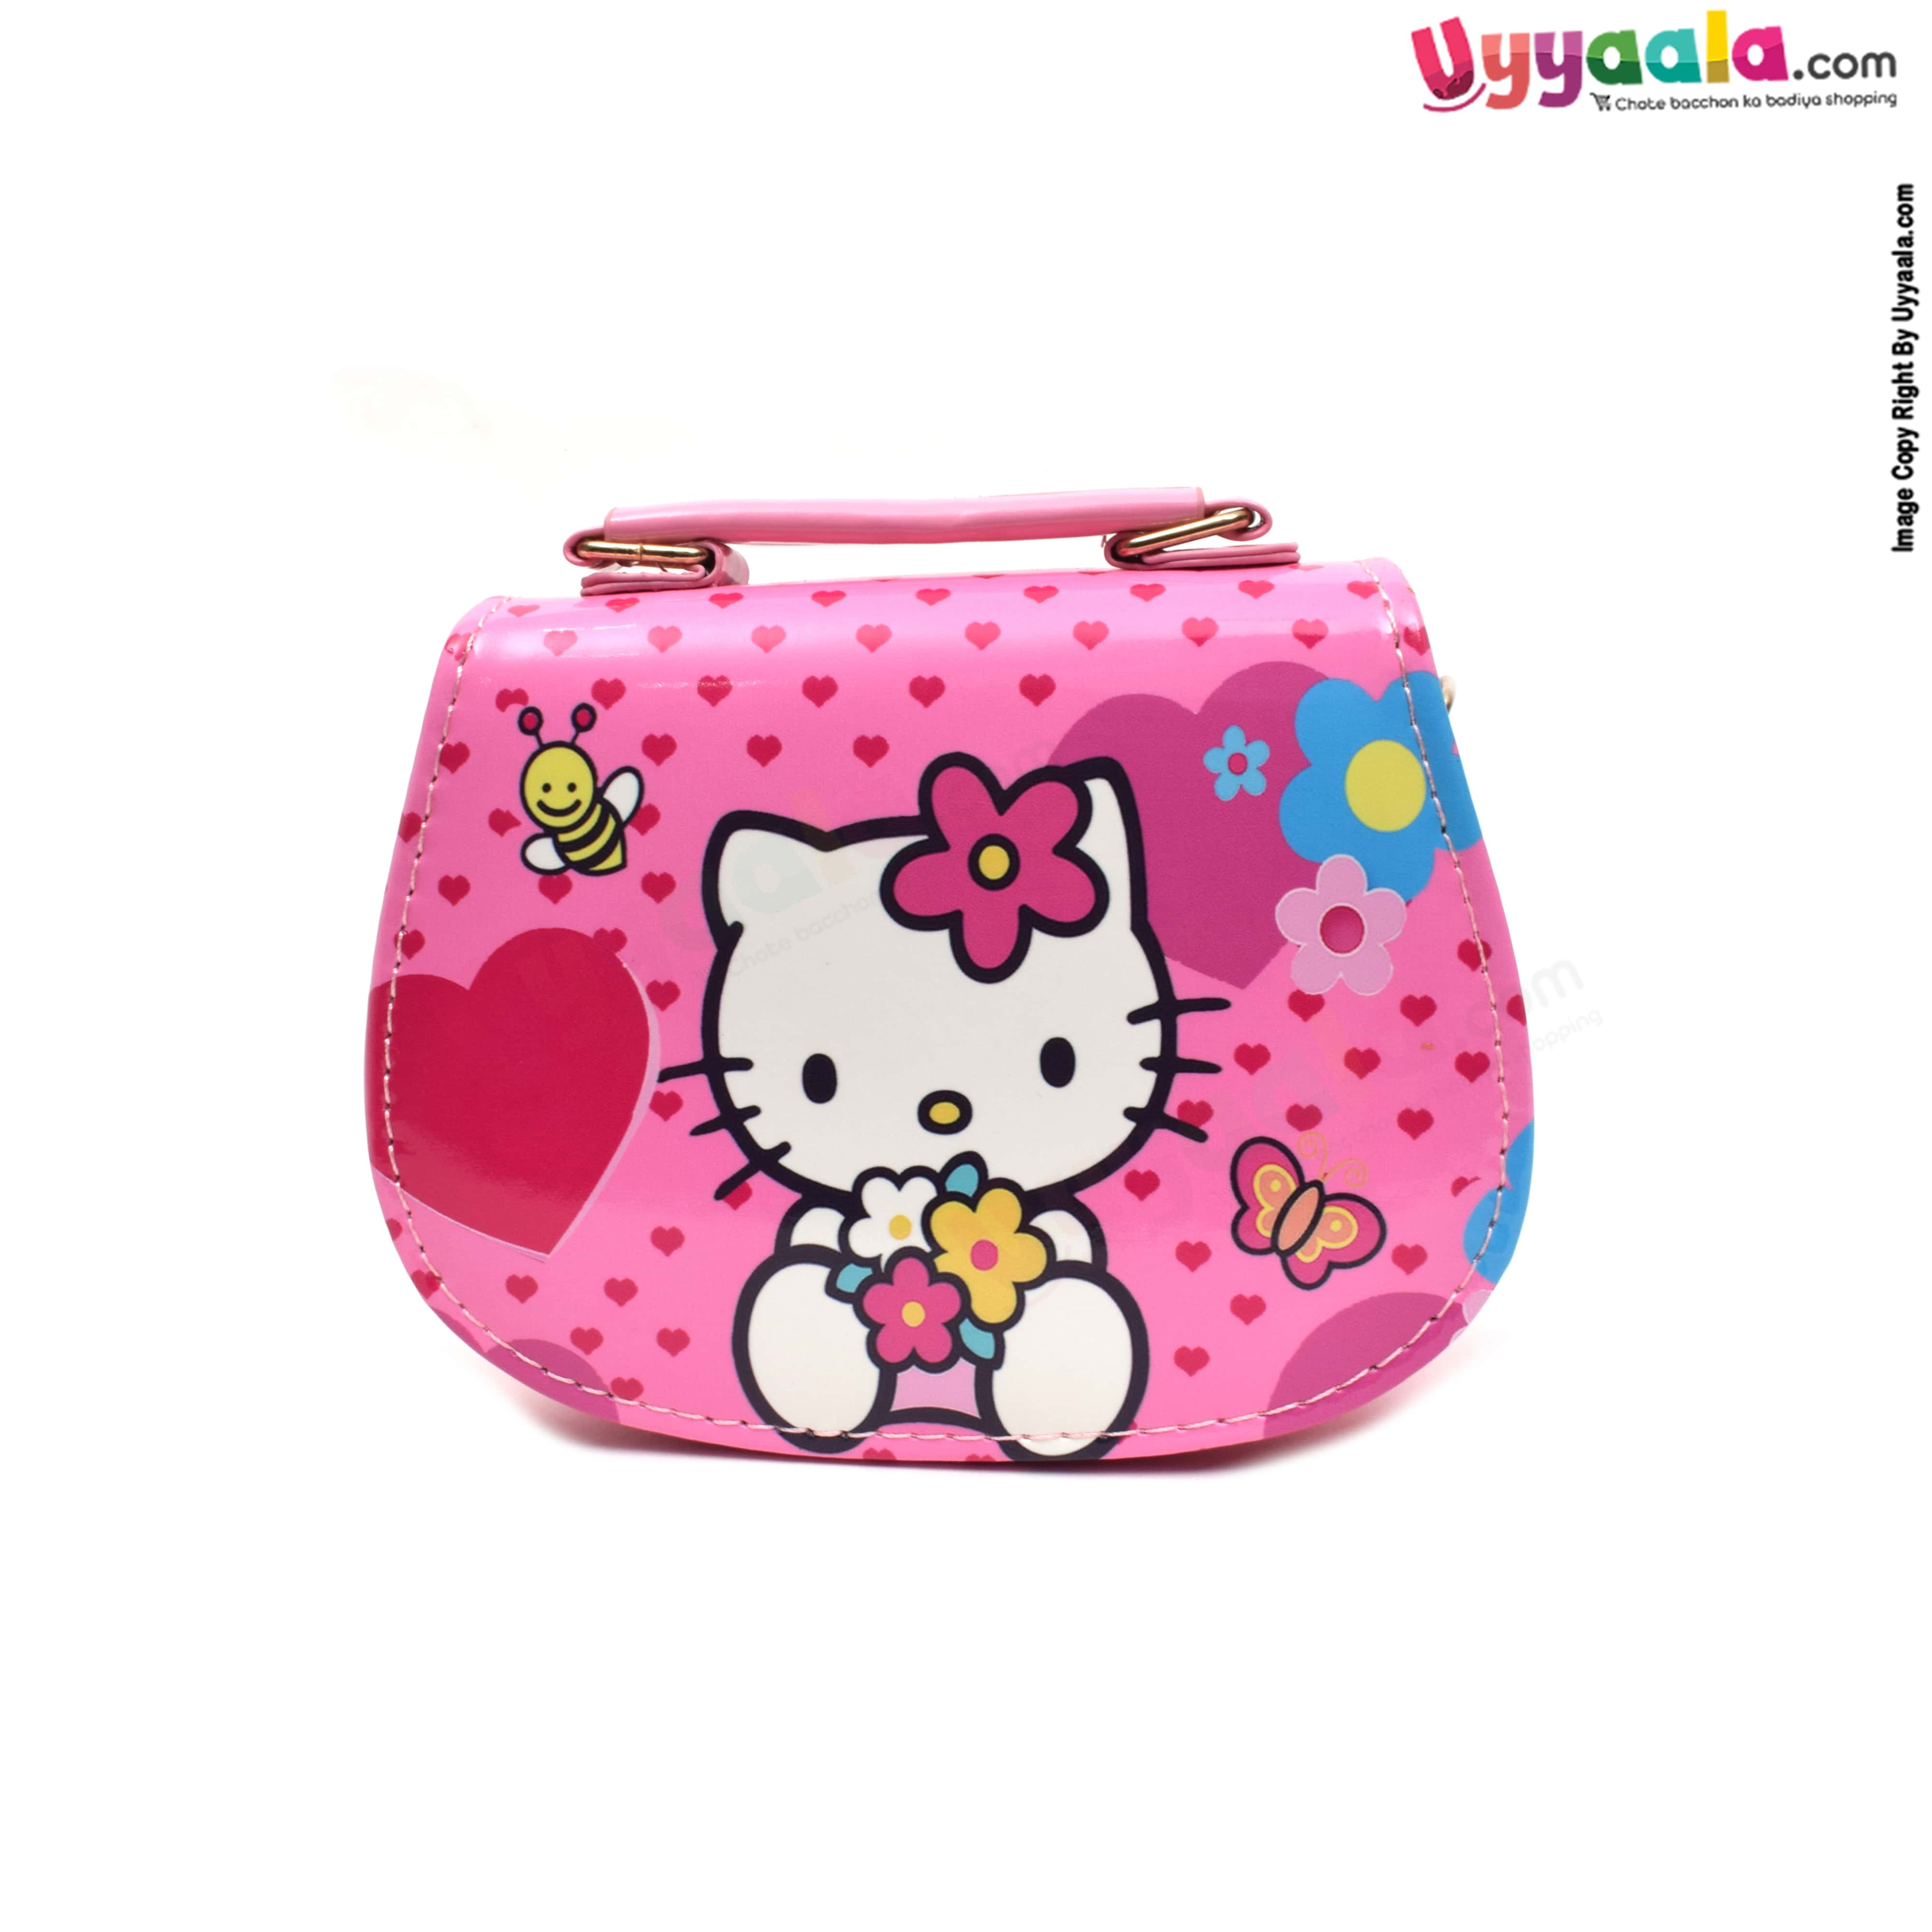 kids Party wear hand bag for baby girl with adjustable strap & hello kitty print